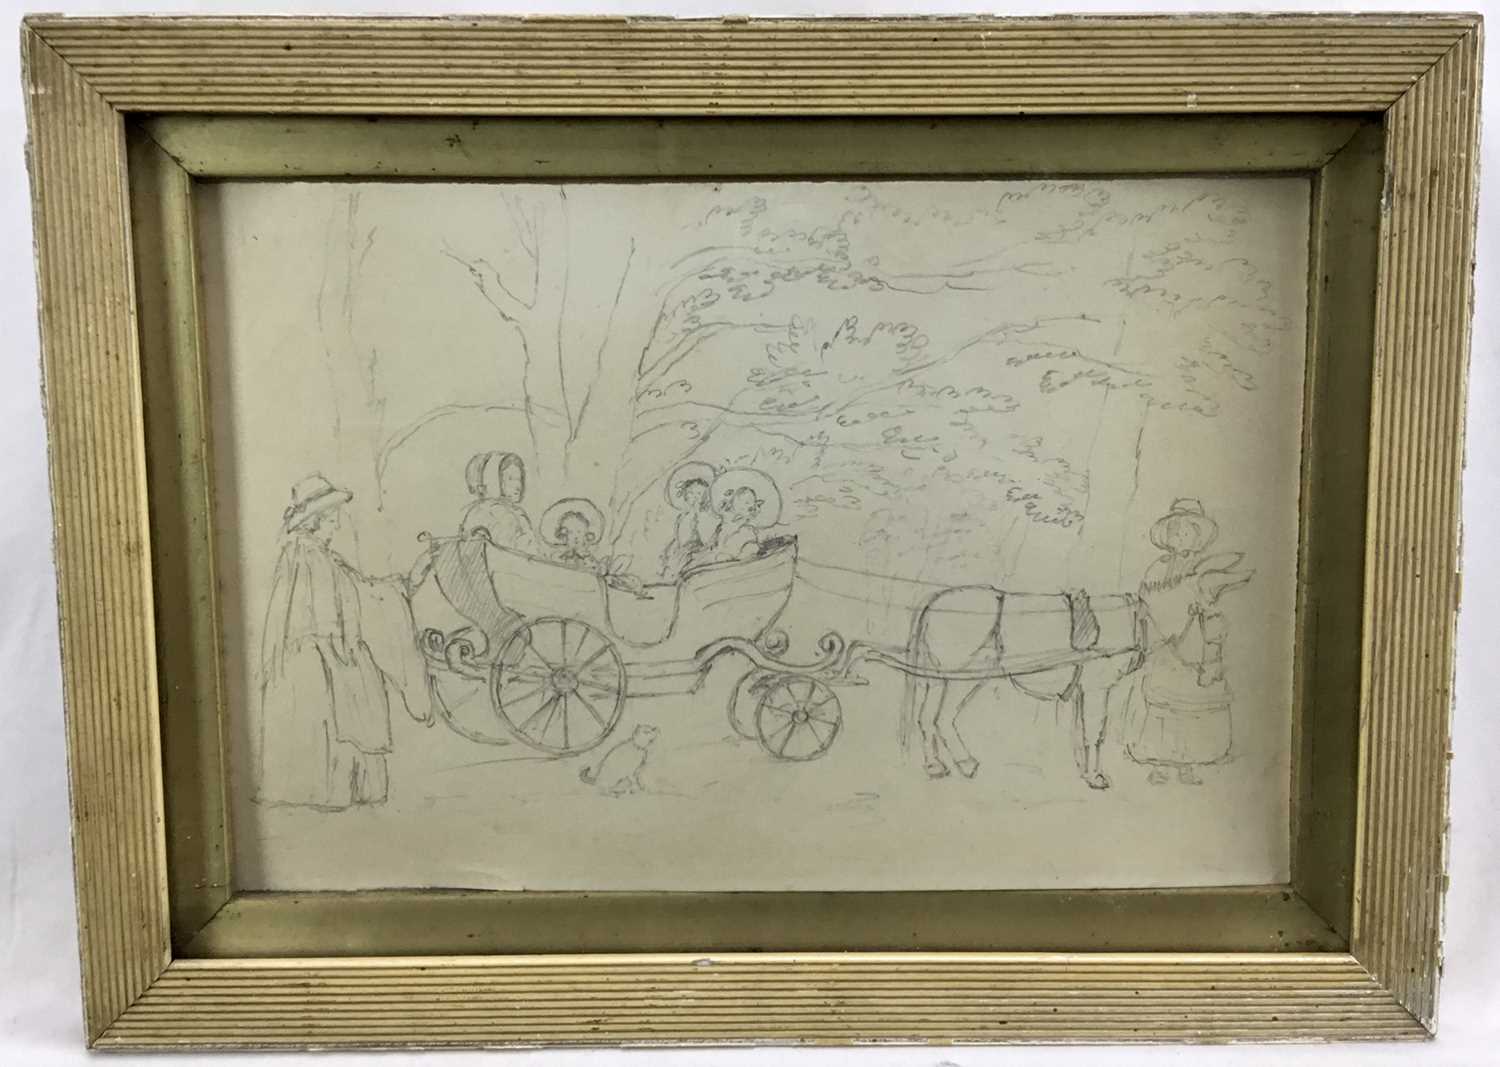 Lot 68 - Early victorian naive school, graphite drawing of a donkey pulling a small childs carriage beside trees, two women leading the donkey. Signed and inscribed verso “May 24th 1853”. In period white la...